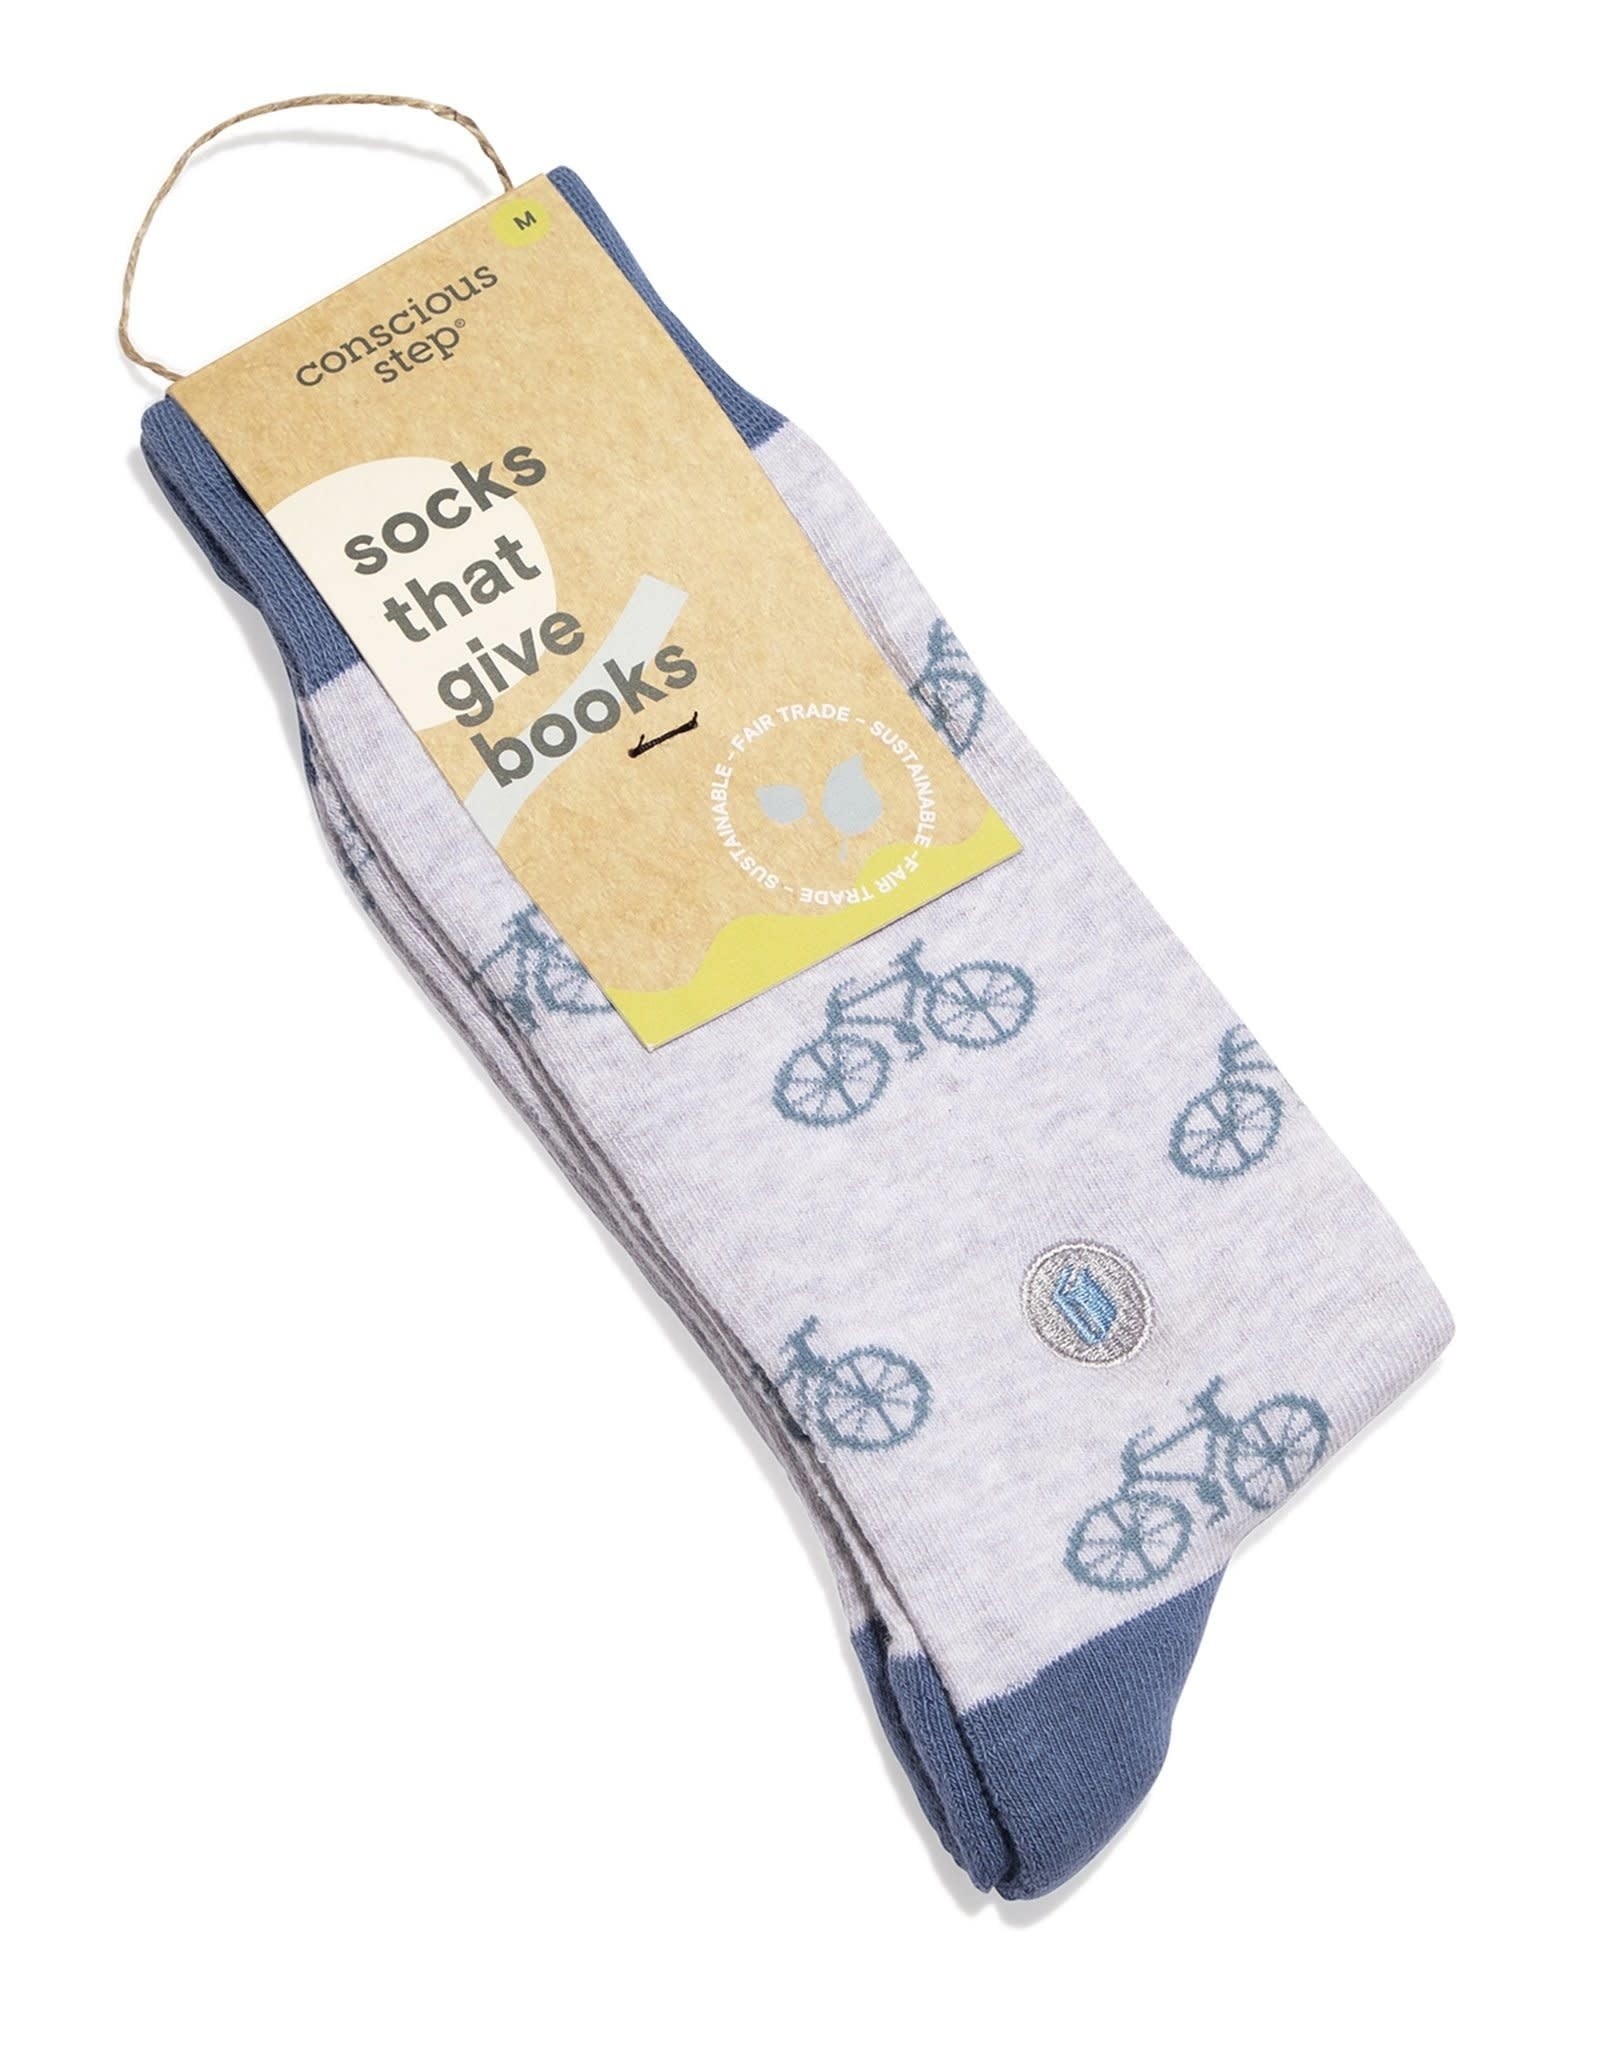 Conscious Step Socks that Give Books (Bicycle)